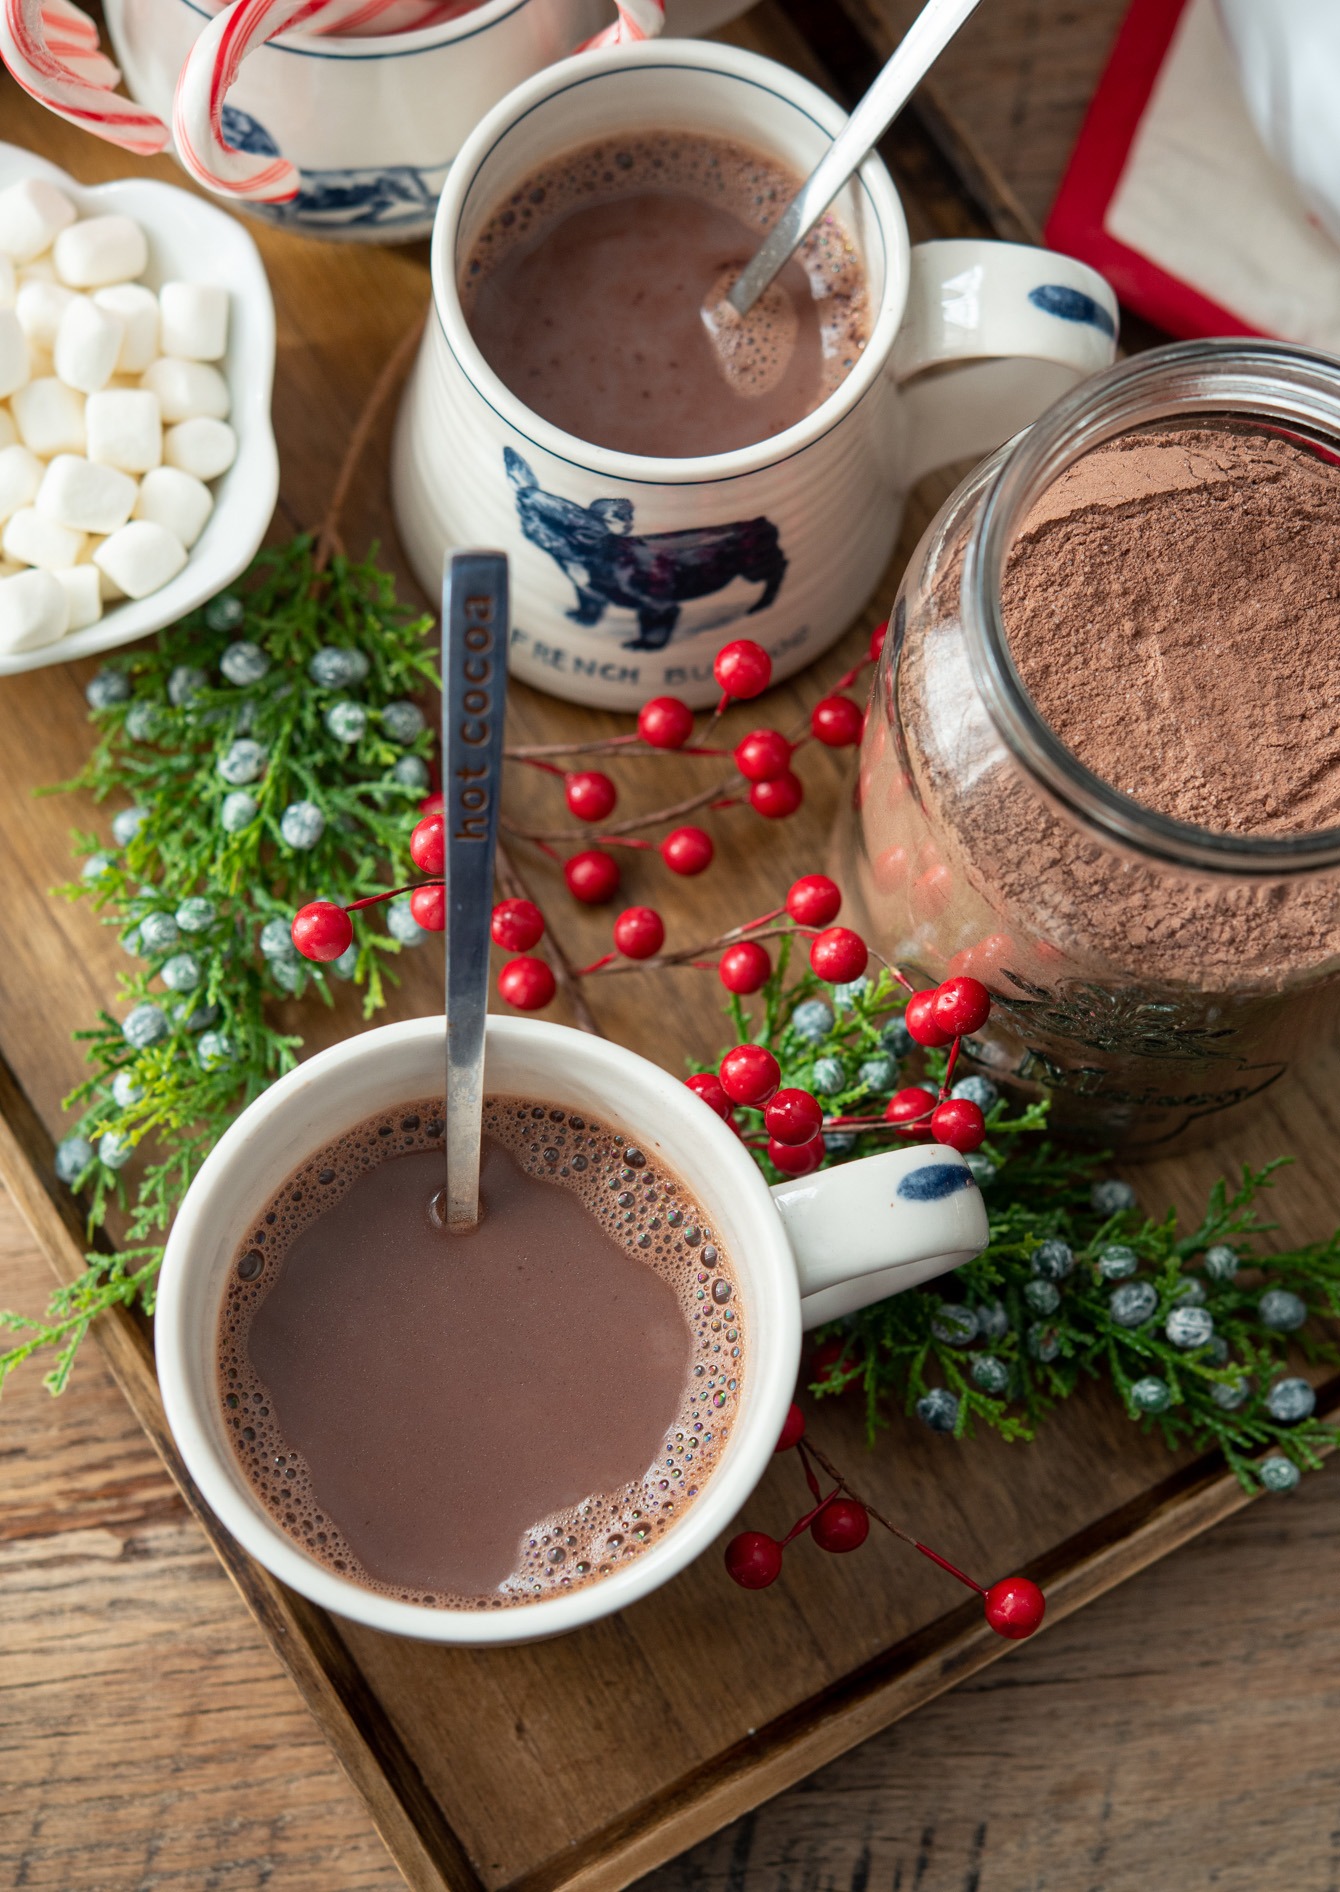 Hot chocolate in a mug with homemade cocoa mix and marshmallow.